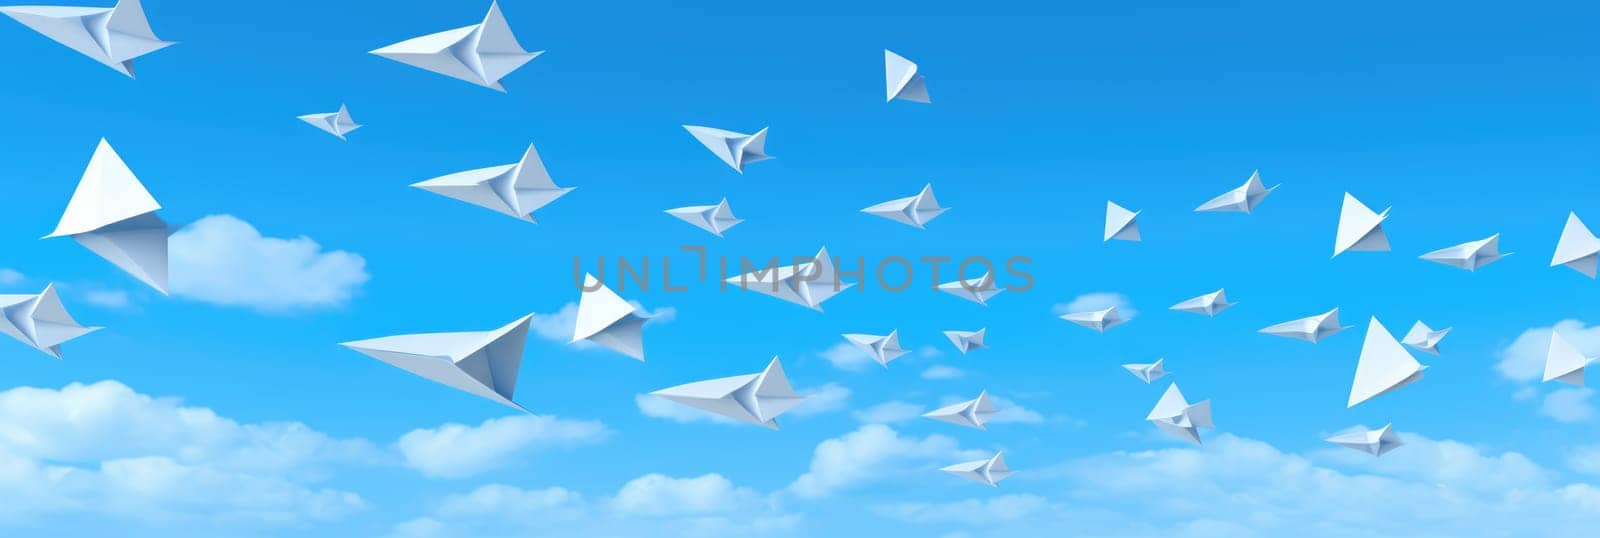 Paper airplanes on a blue background. Wide format banner by natali_brill